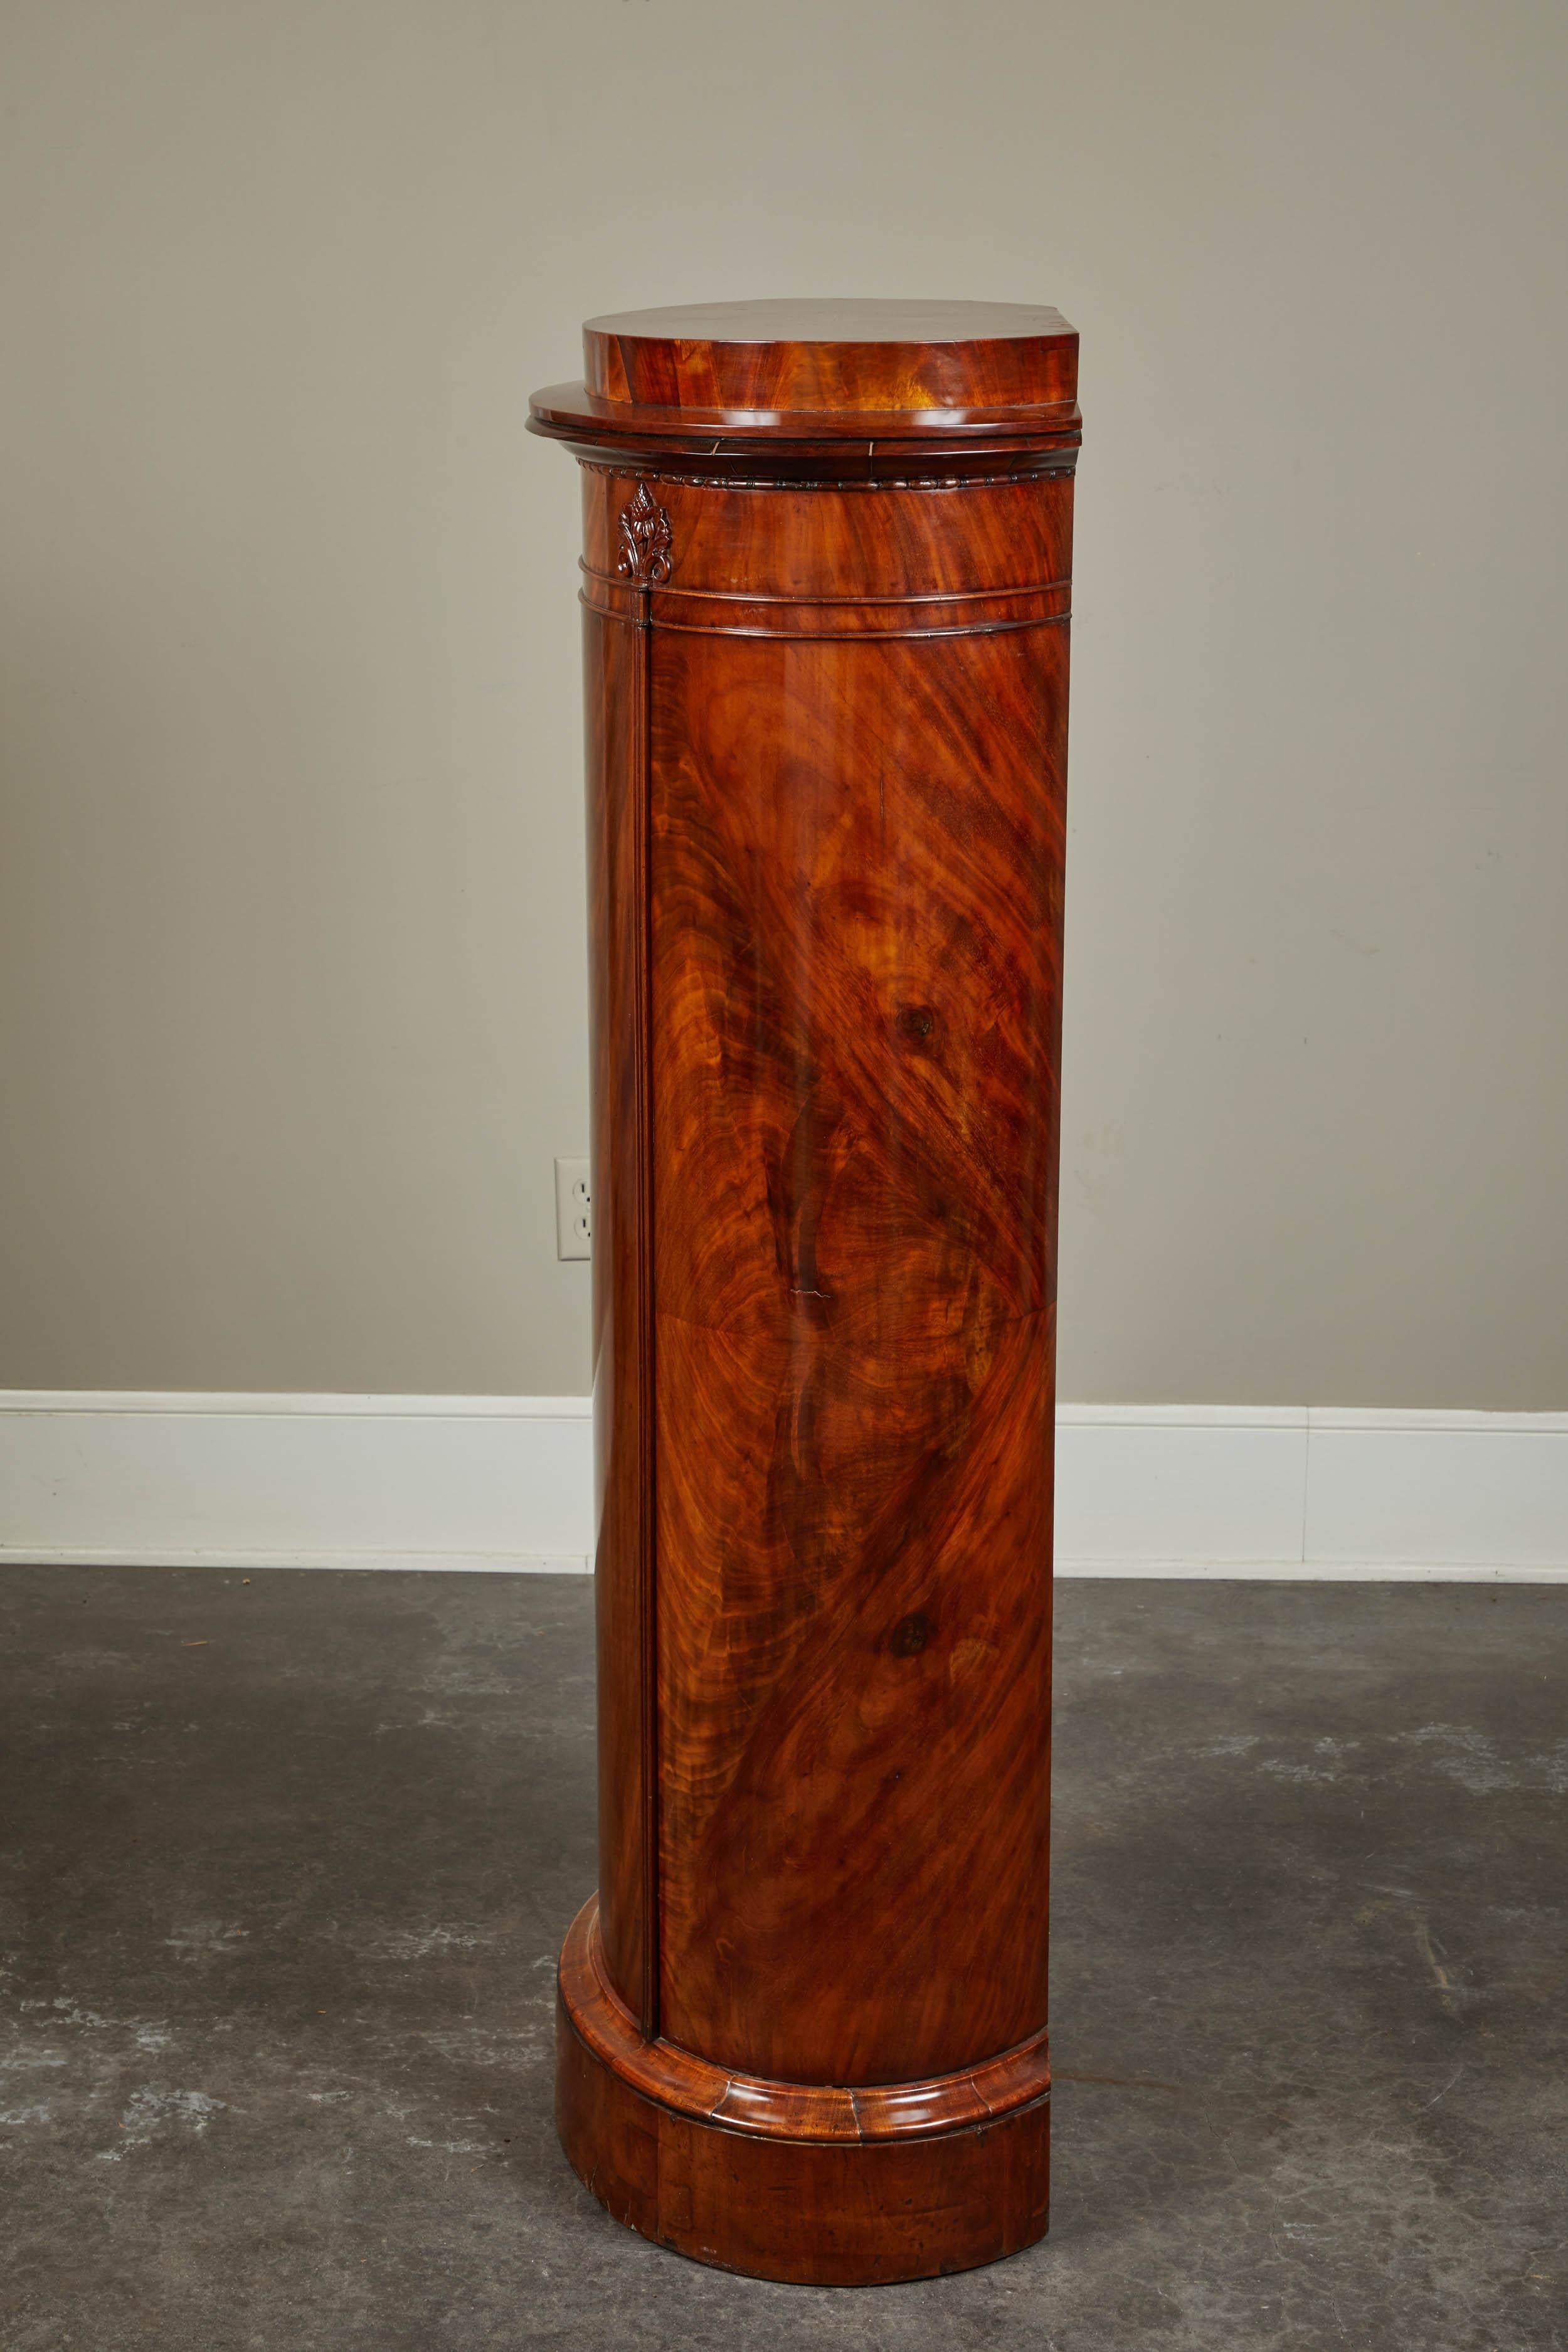 A remarkable mid-19th century Danish mahogany pedestal cabinet in the Biedermeier style comprised of mahogany wood and one key hole. This piece was made to showcase a beautiful object or sculpture and yet still maintains a utilitarian use by